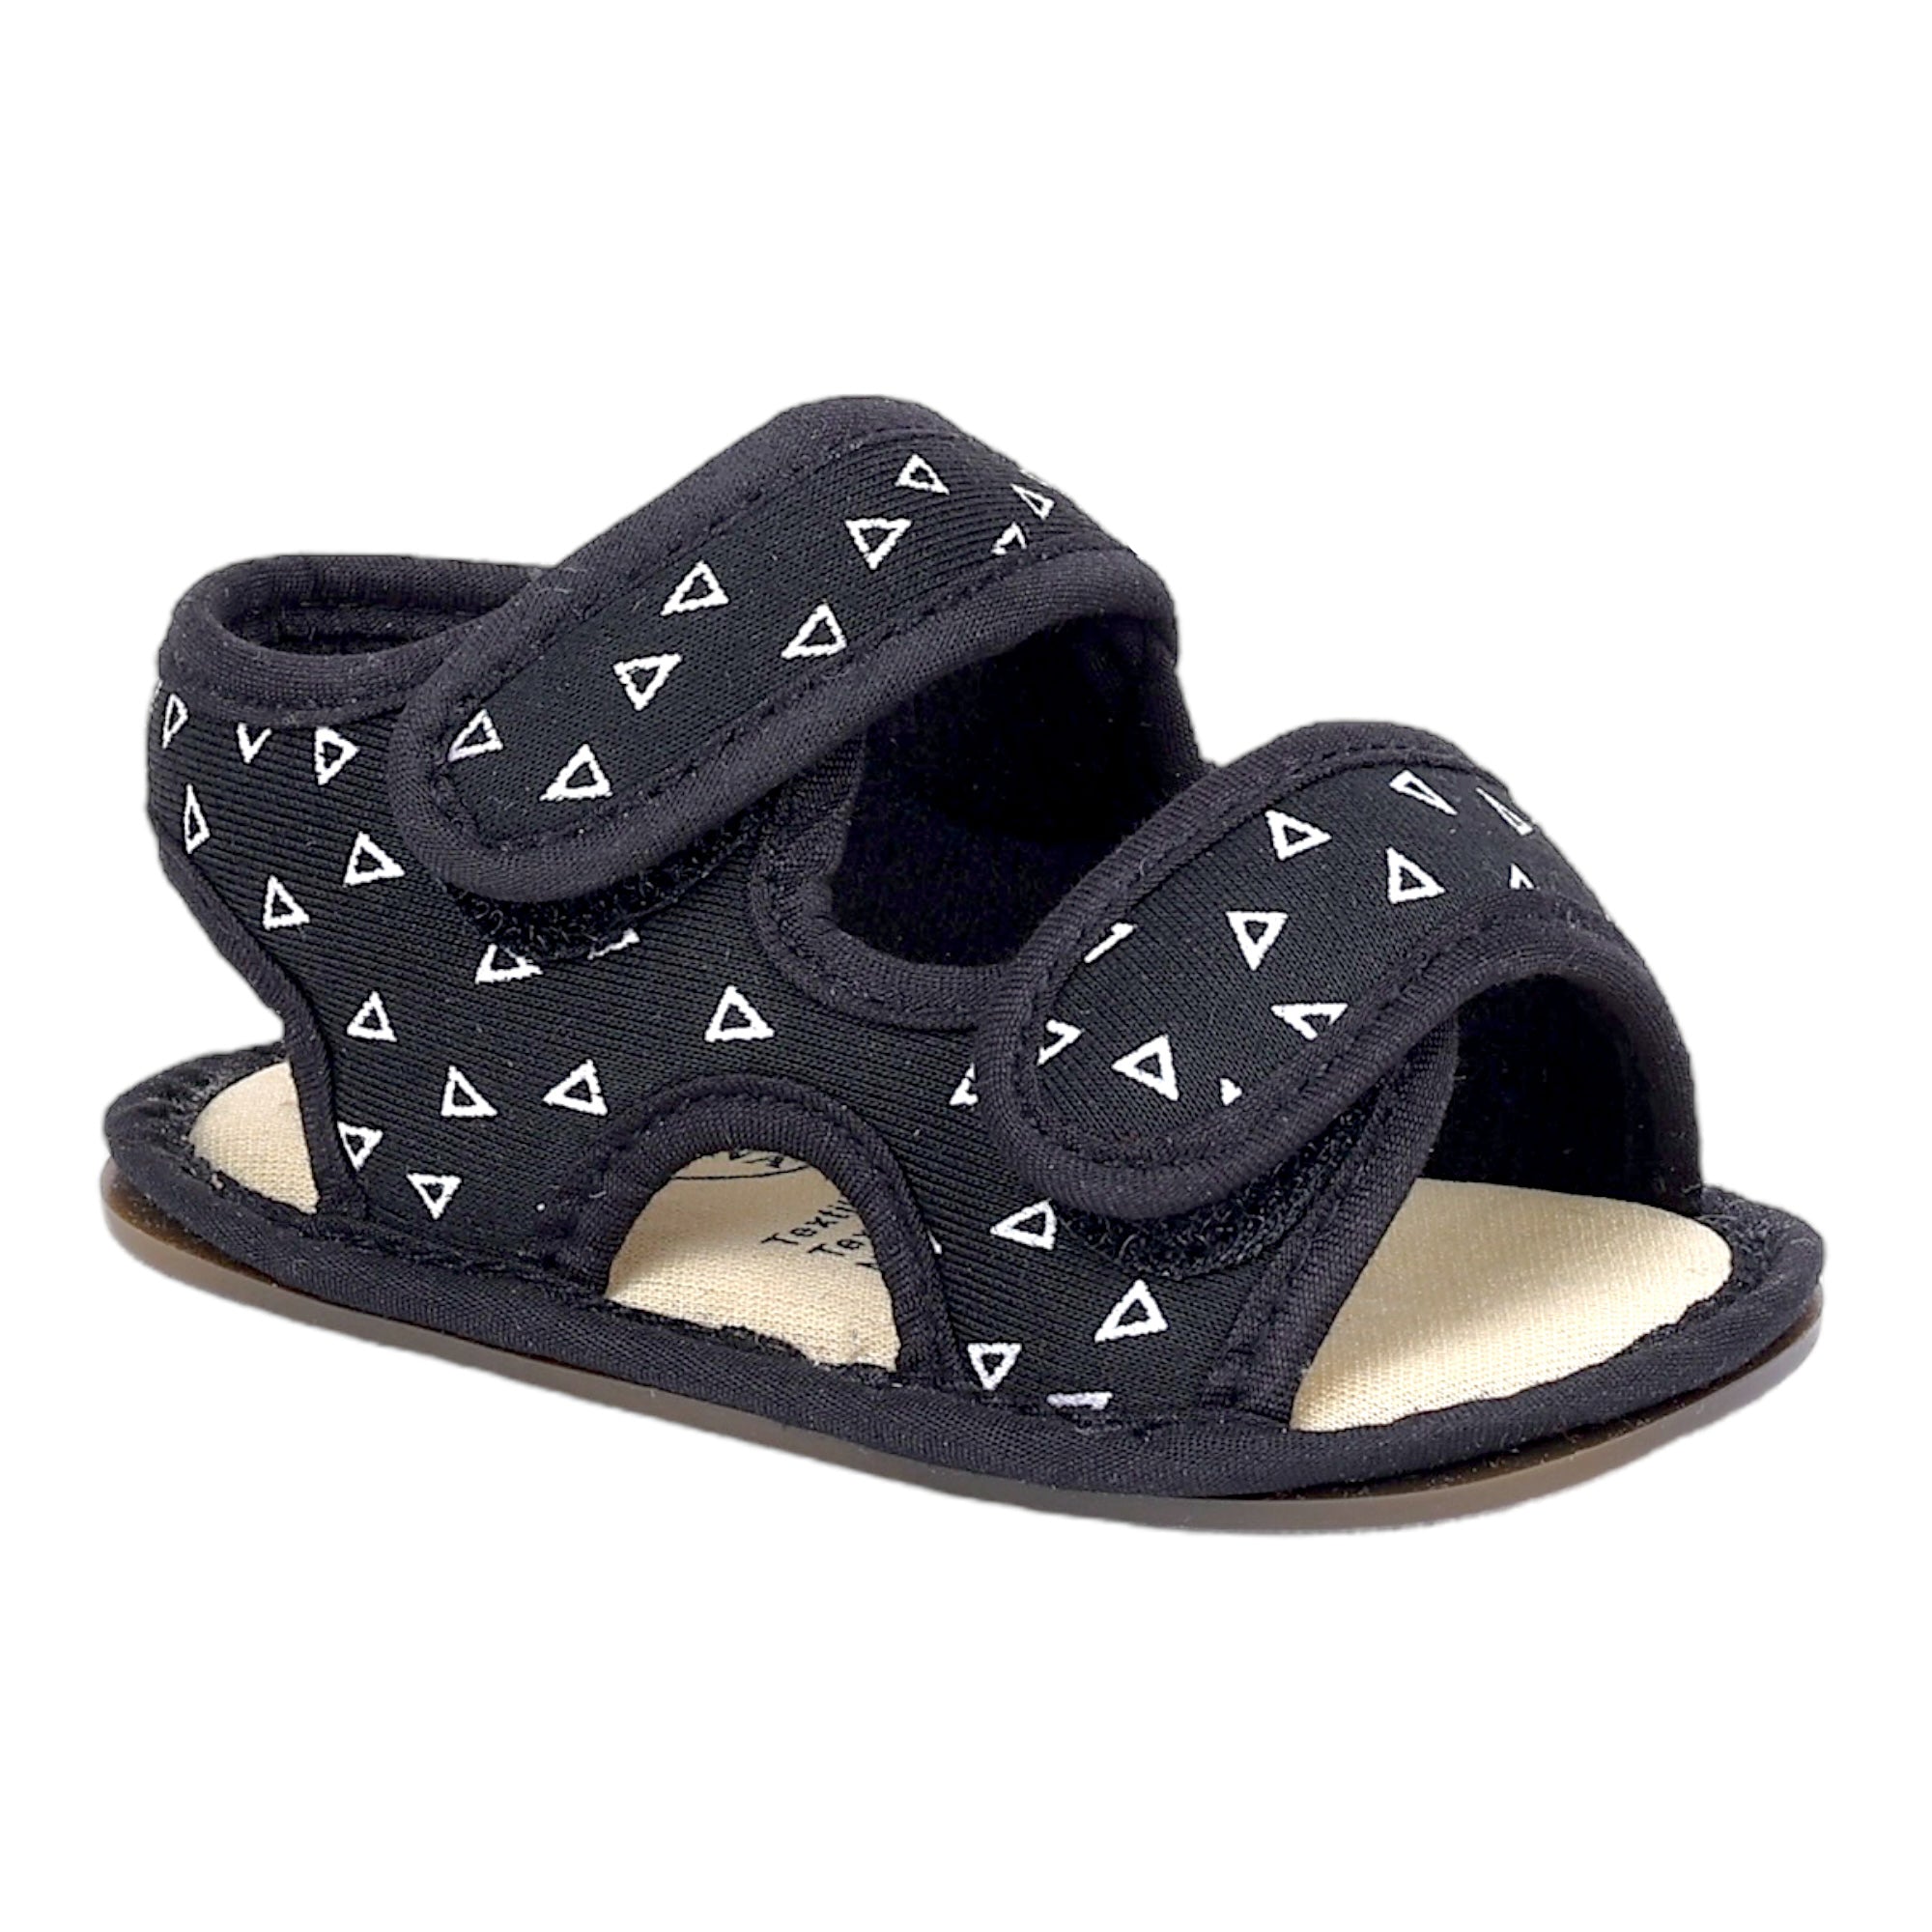 Baby Moo Triangle Comfortable Anti-Skid Velcro Floater Sandals - Black